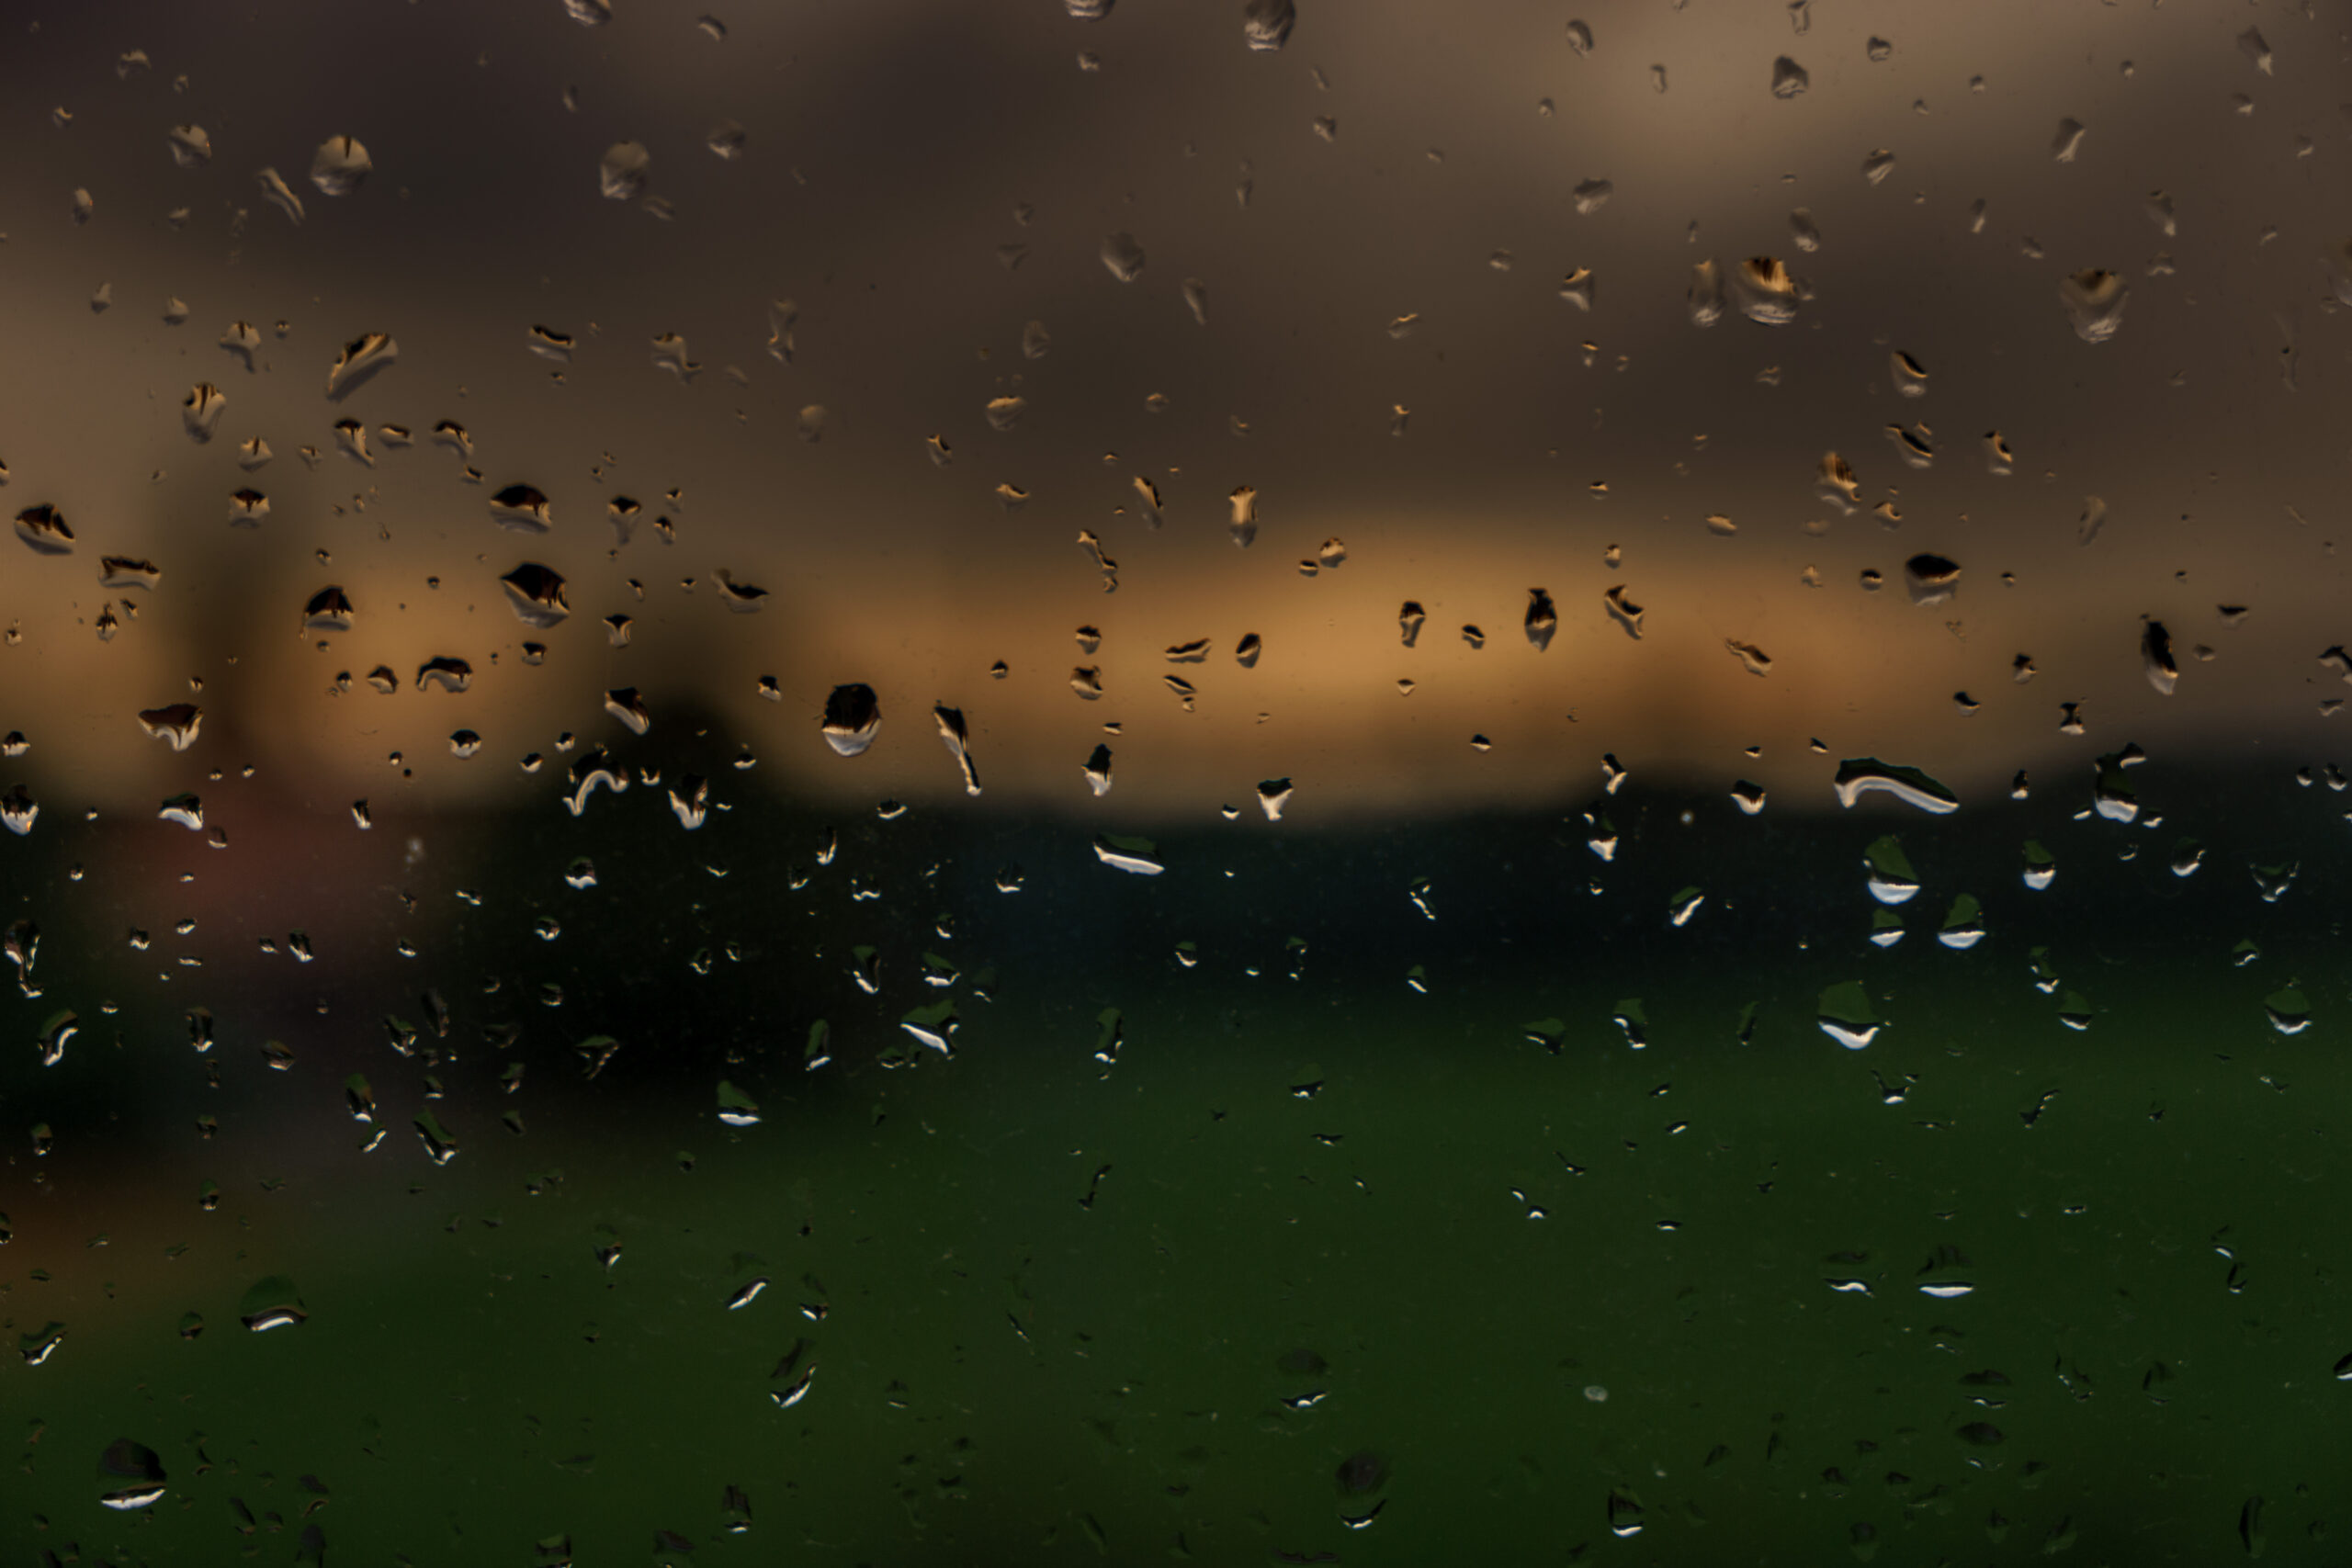 Image of raindrops on a window